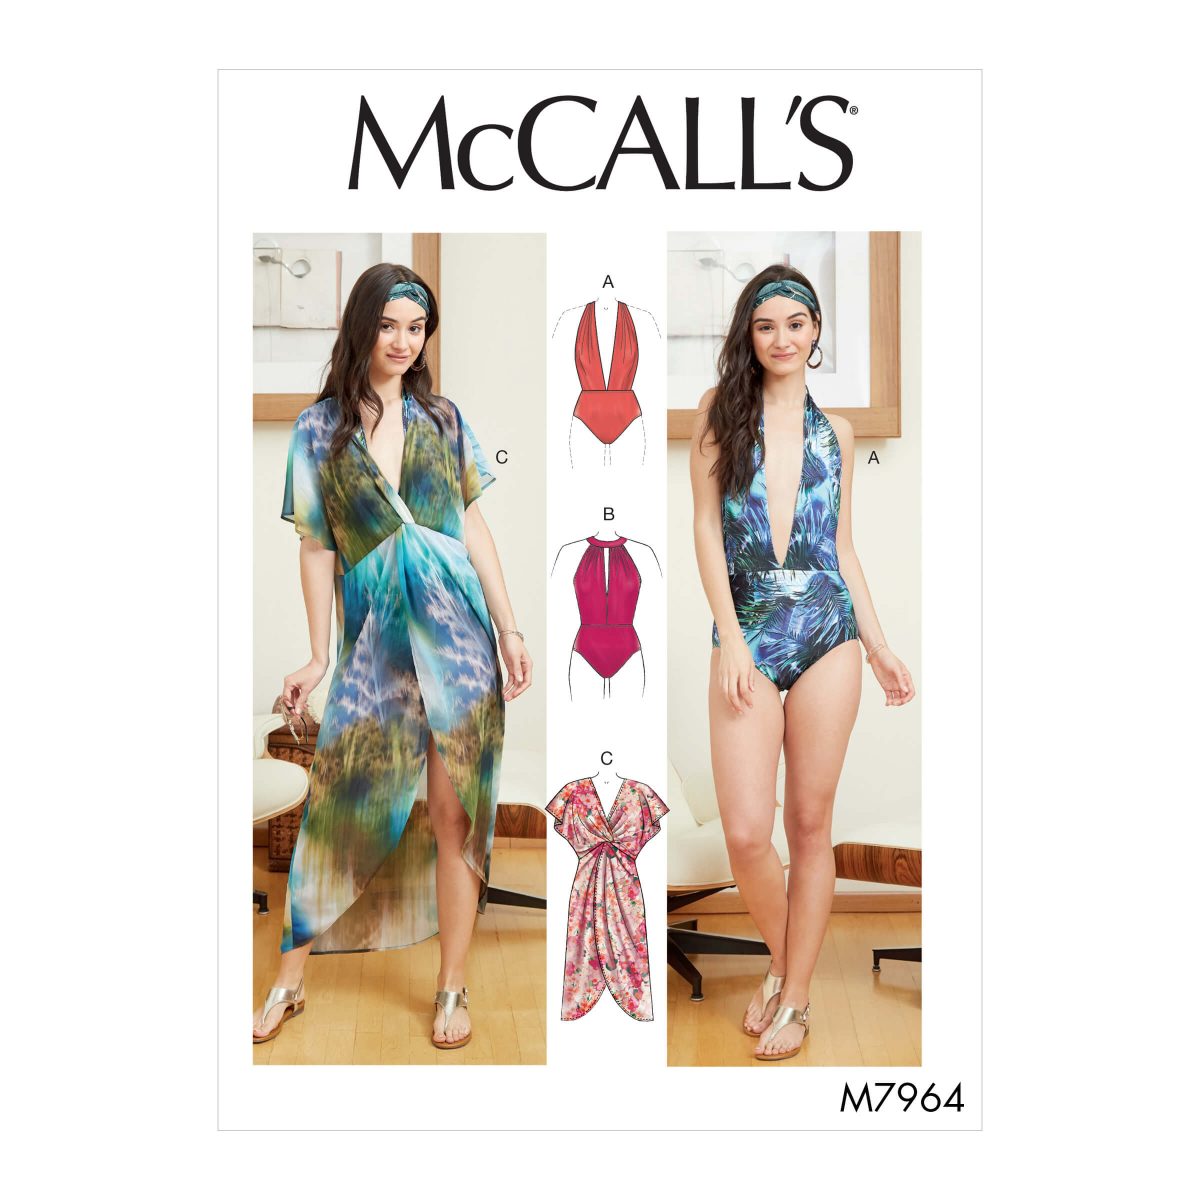 McCall's Sewing Pattern M7964 Misses' Swimsuit and Cover-Up